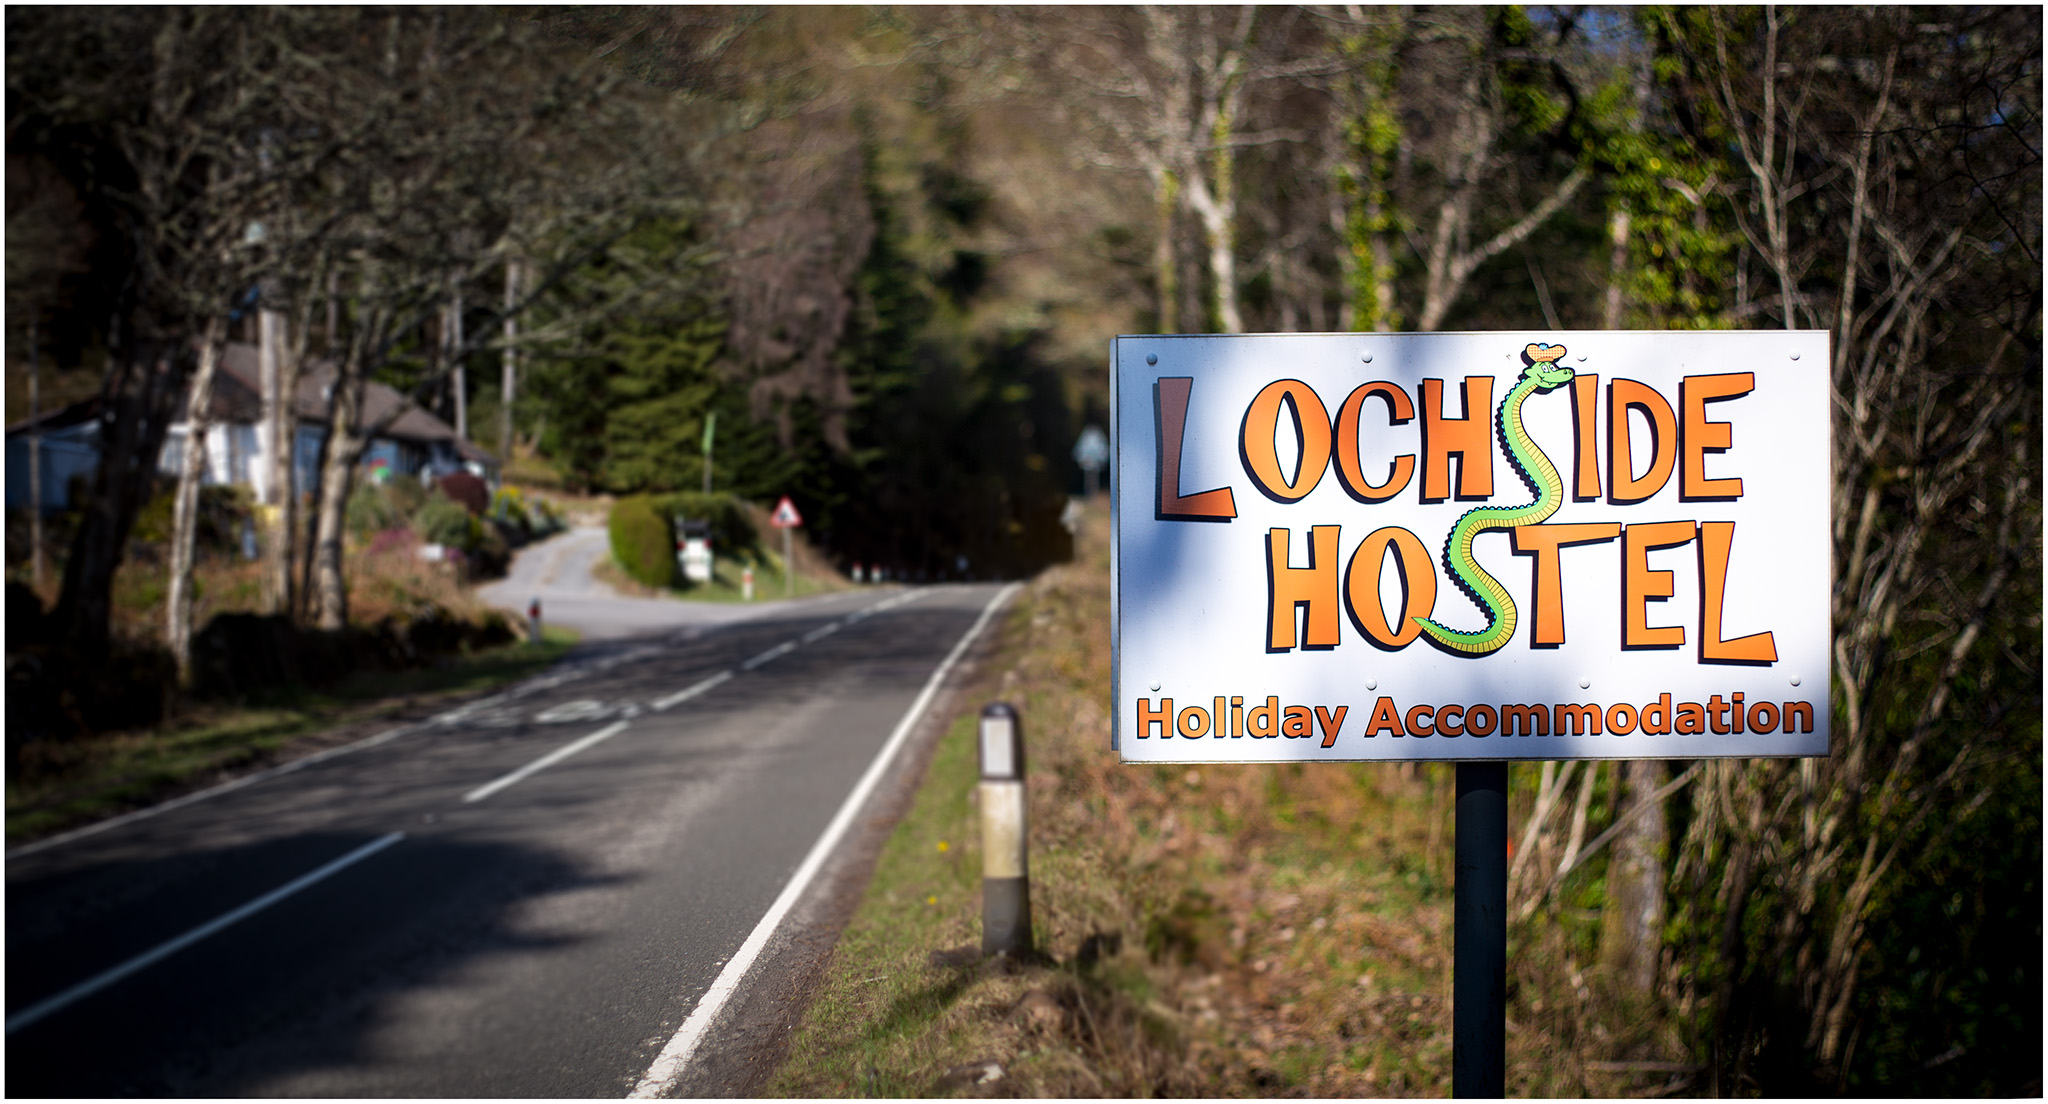 Lochside Hostel Sign from the Road